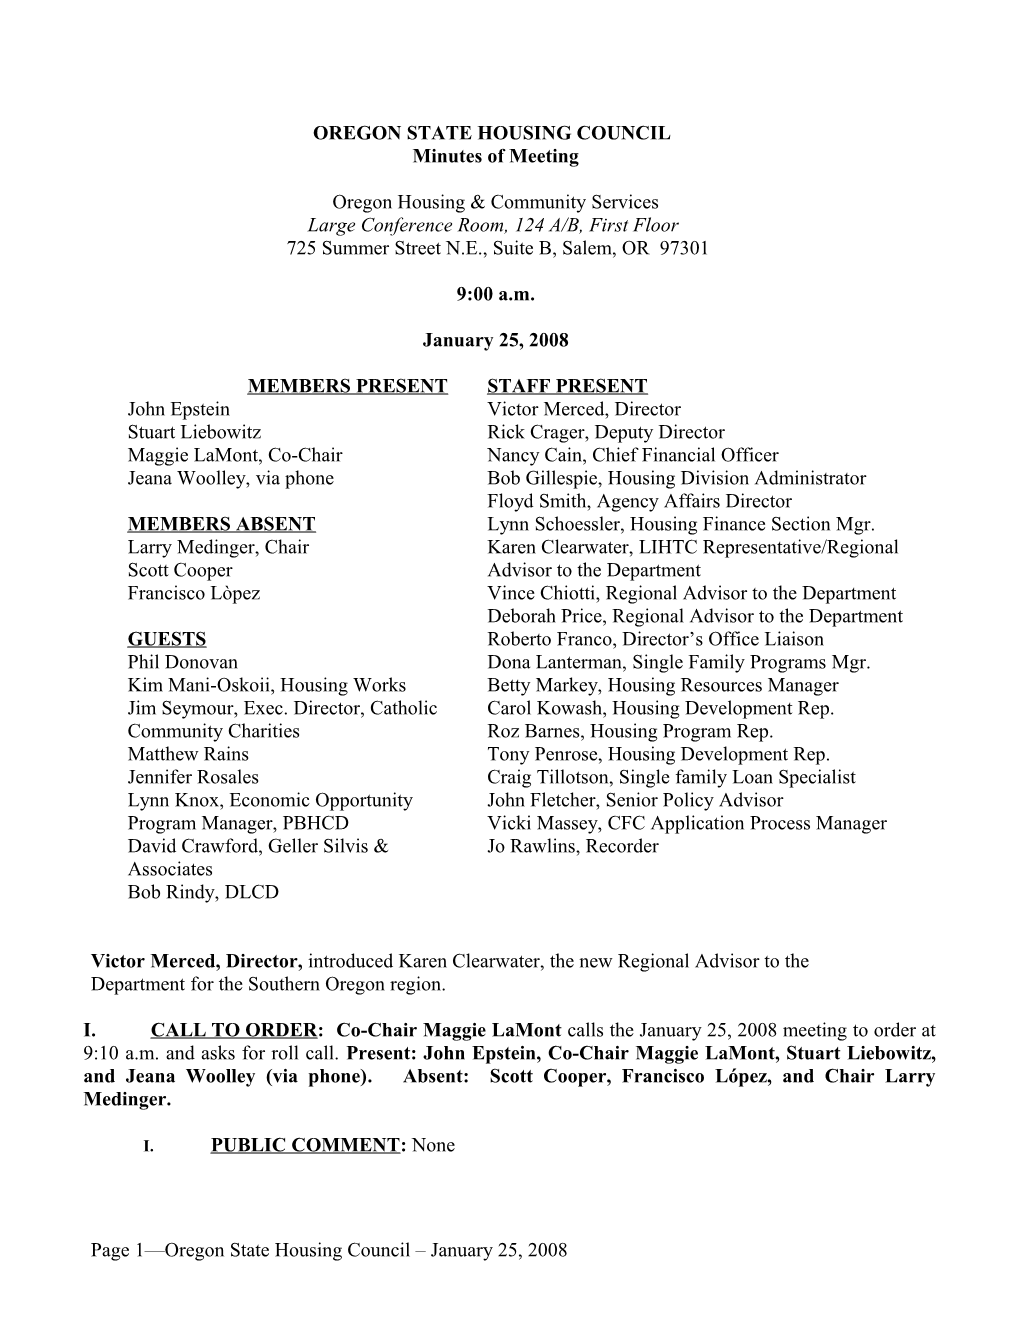 01-25-2008 State Housing Council Meeting Minutes